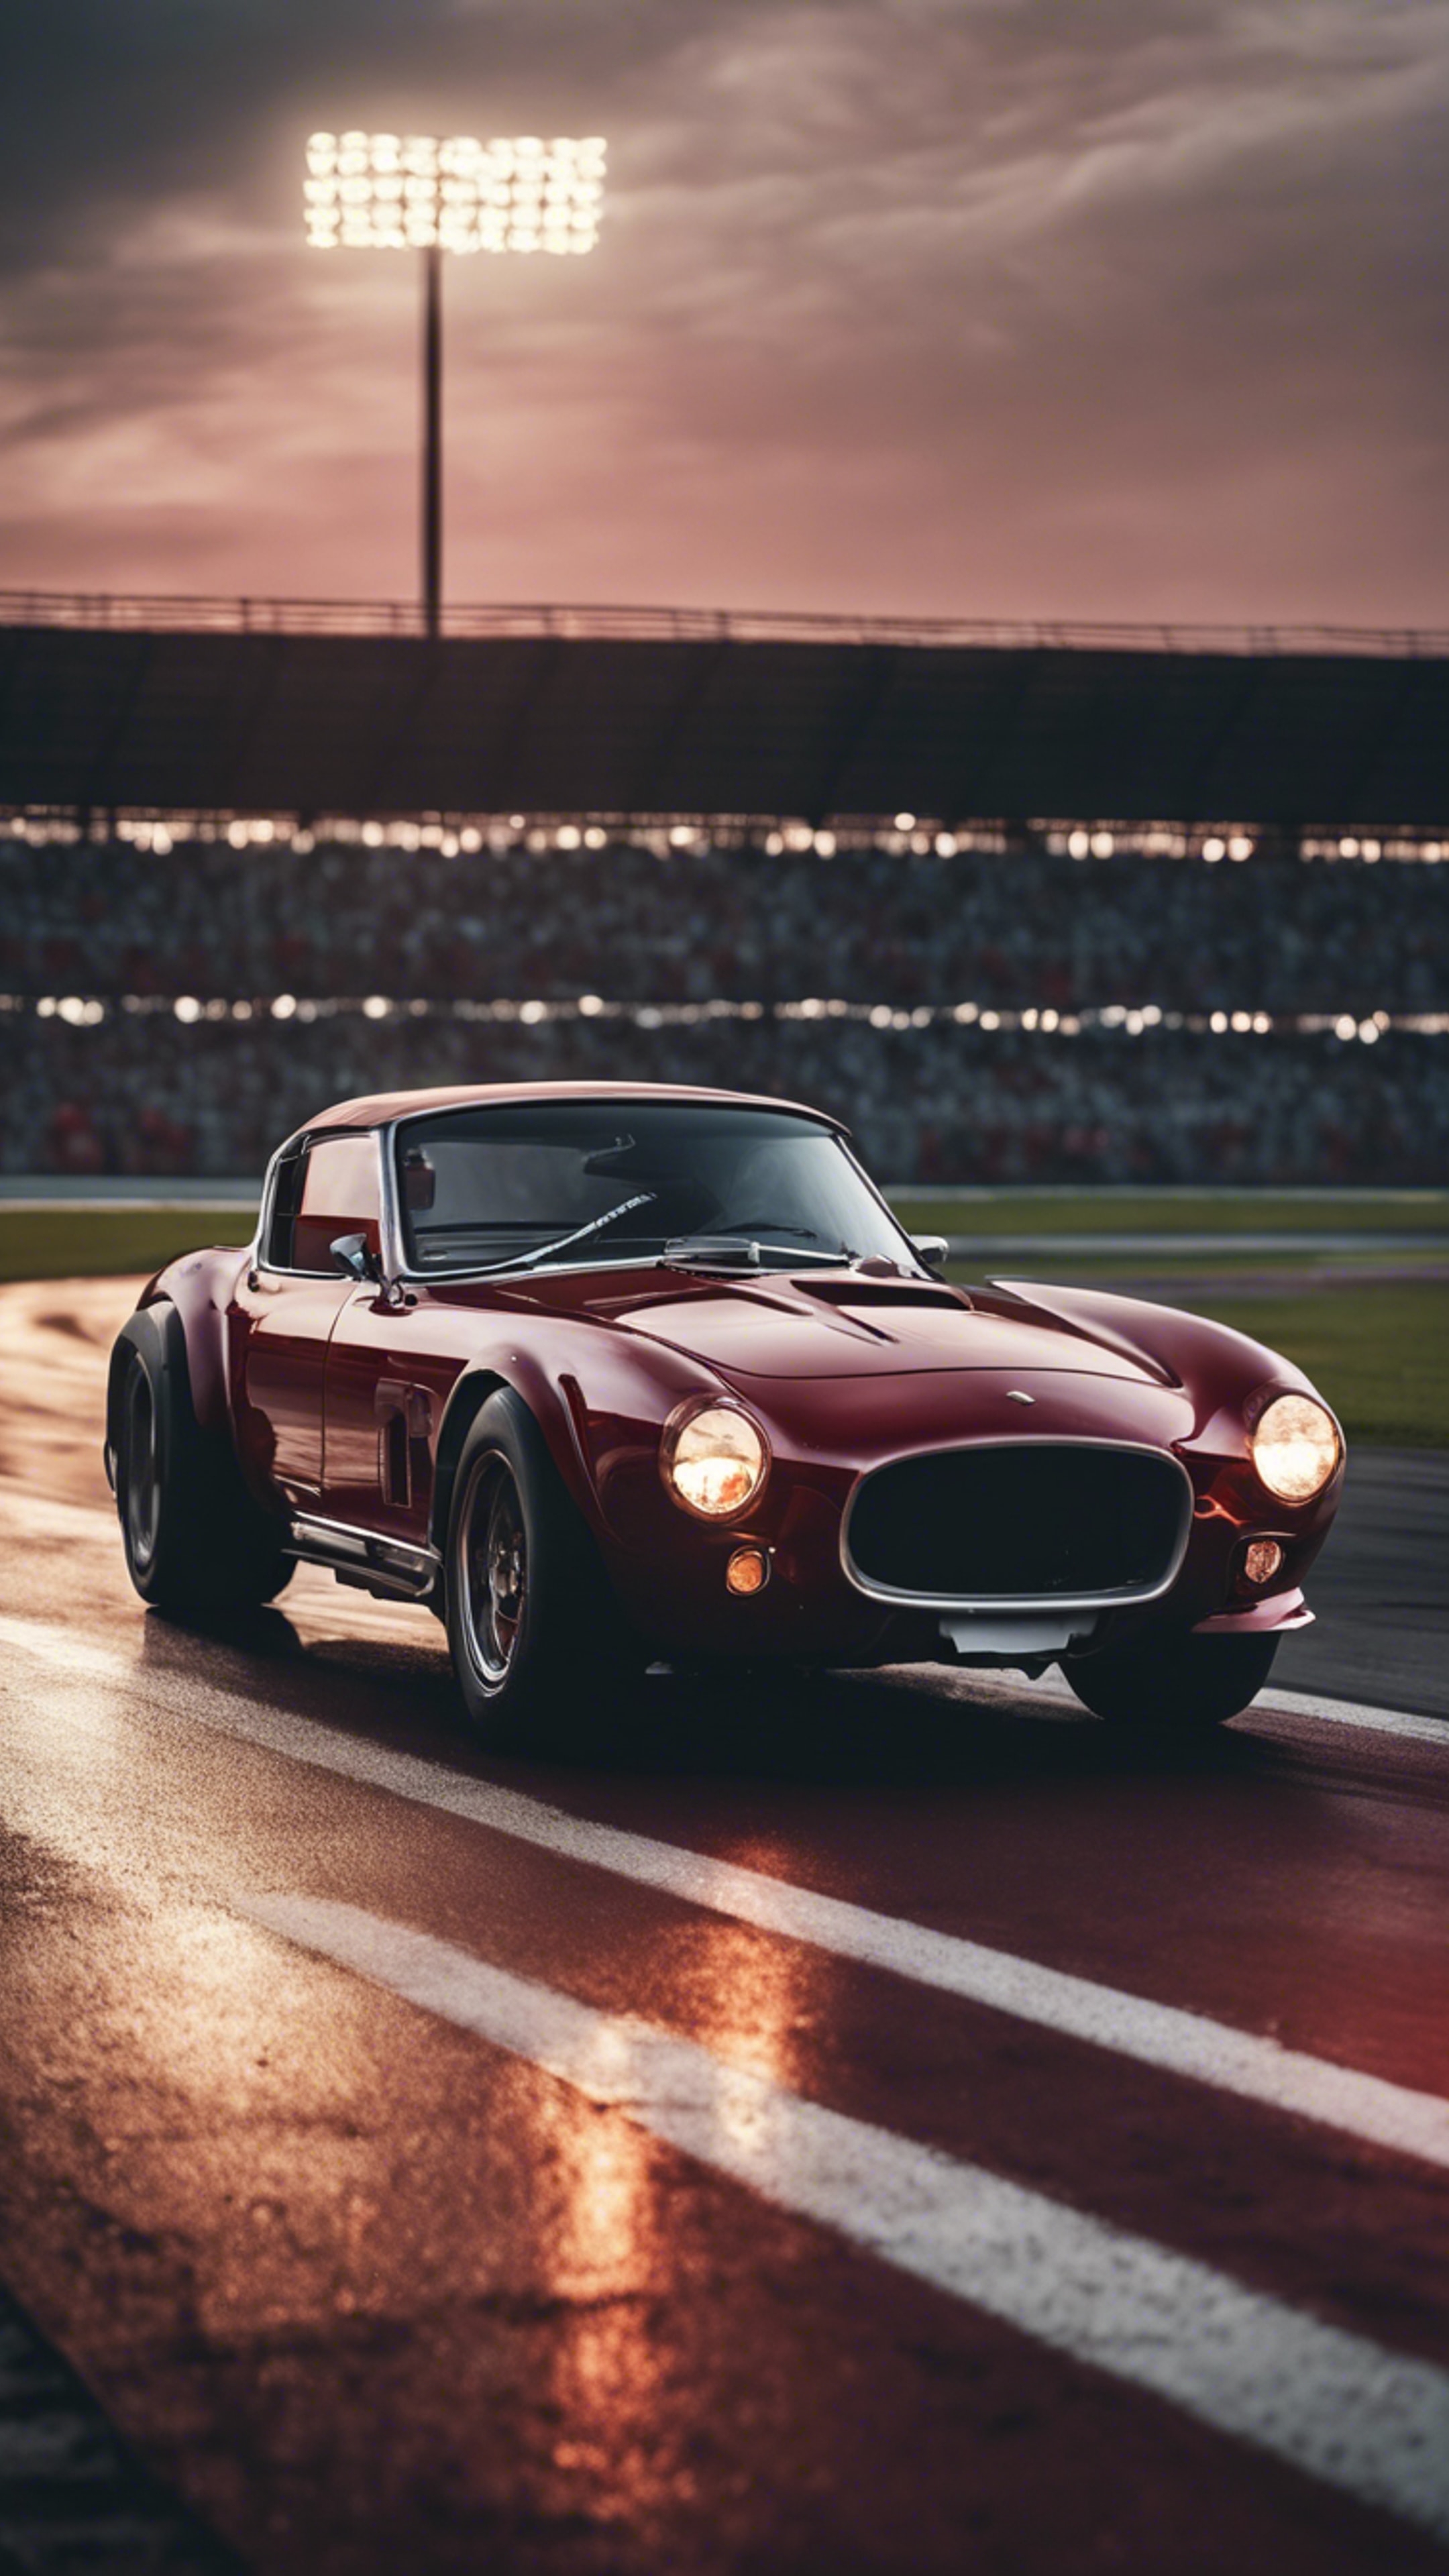 A richly toned dark red sports car racing on a track under the evening sky. Wallpaper[f7c86e5103c94fca80ae]